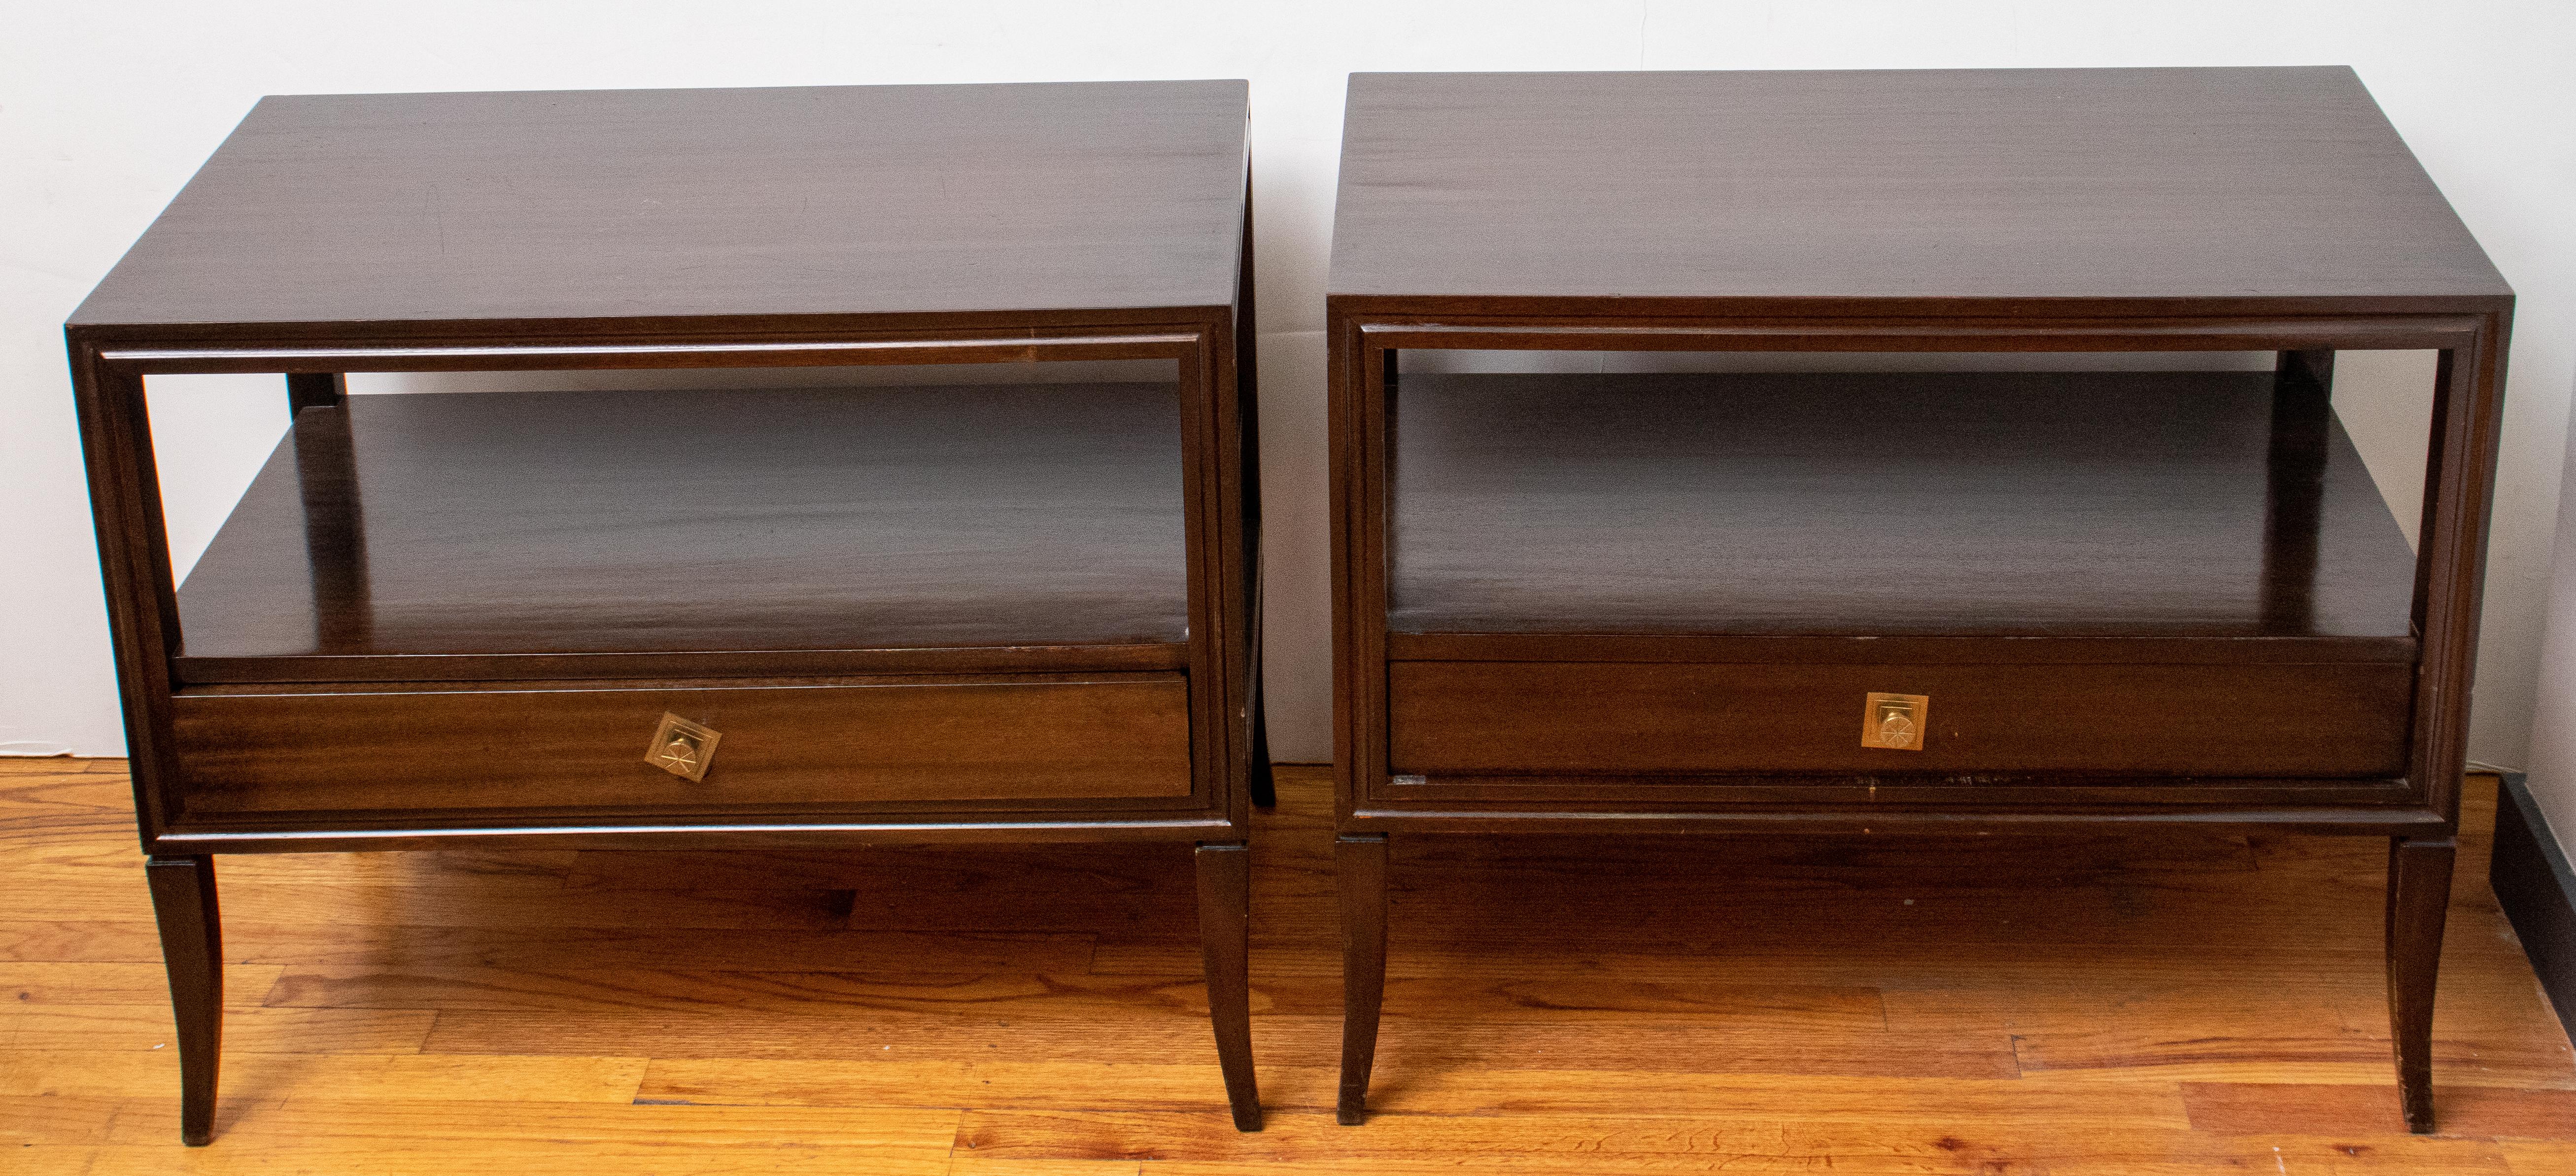 Pair of Mid-Century Modern brown wood nightstands or side tables, each with one drawer with brass pull, unmarked. 
Measures: 23